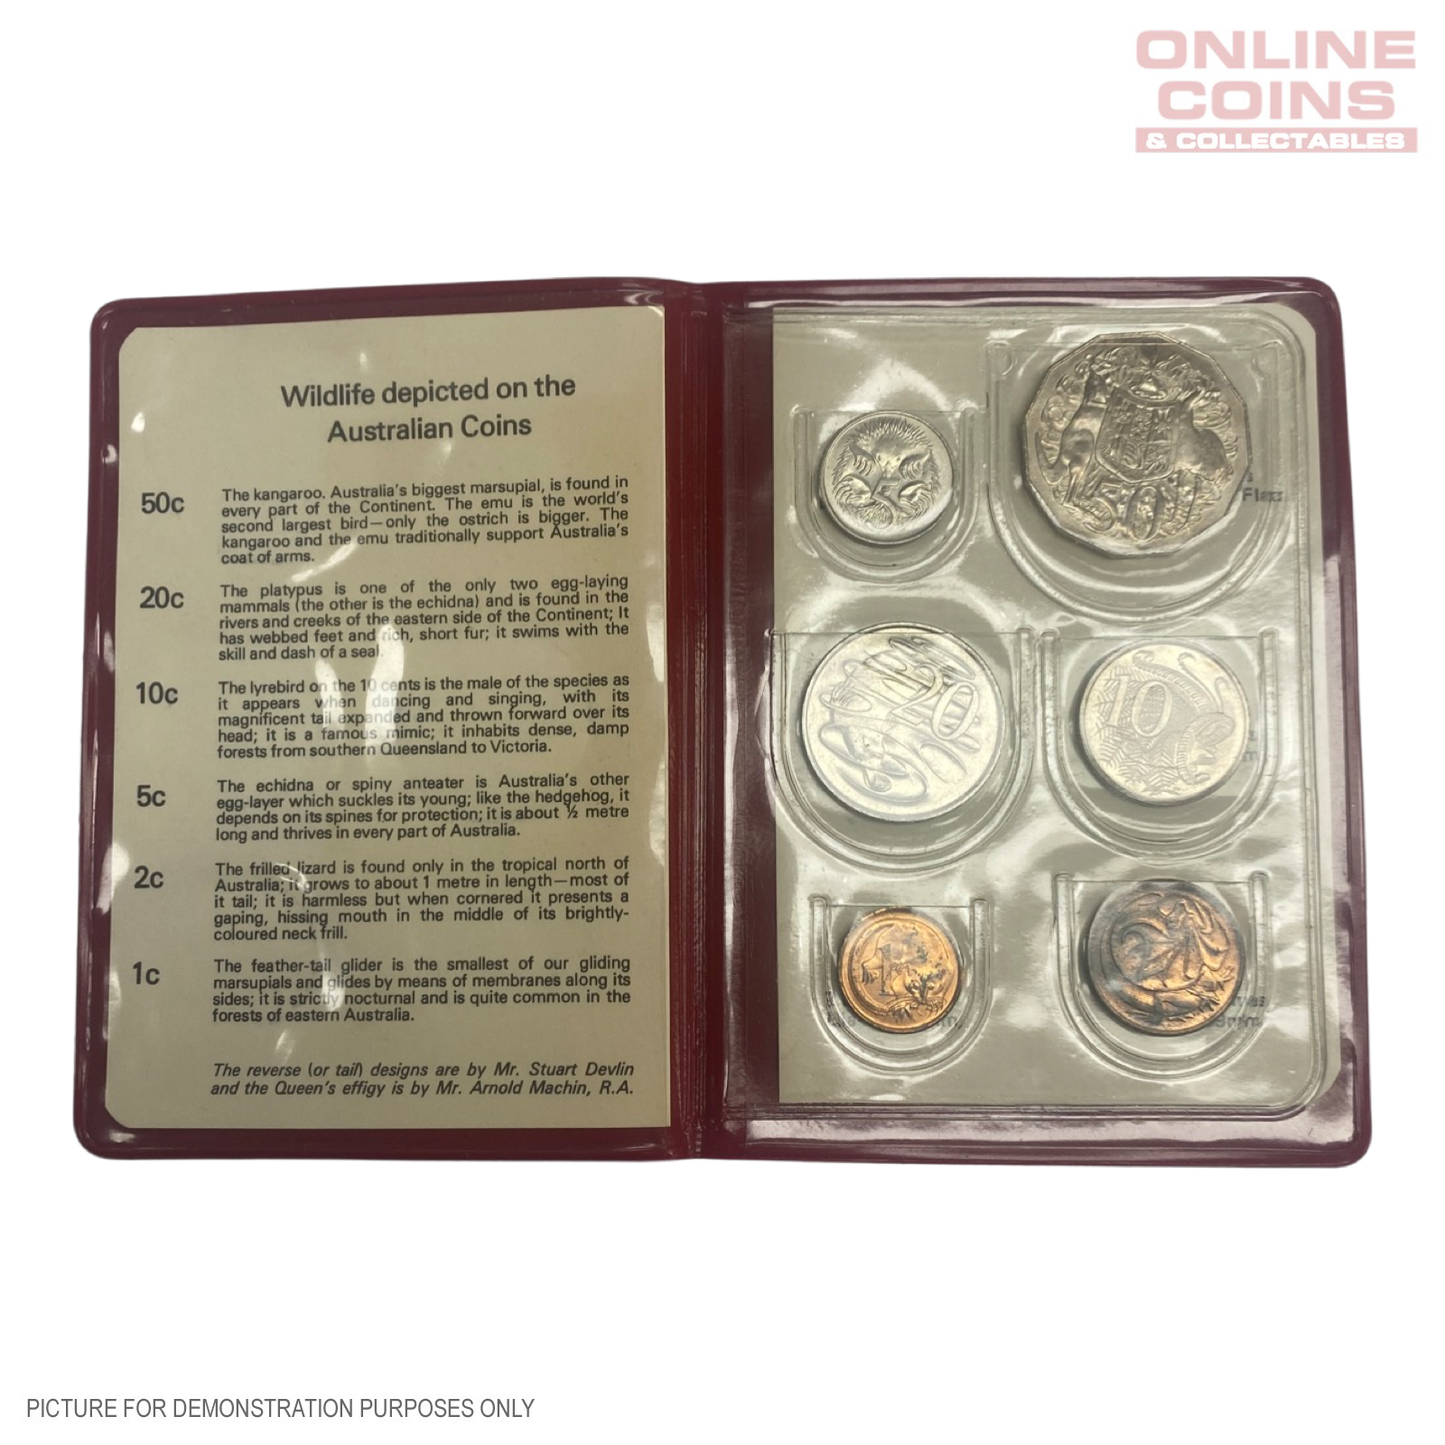 1976 Uncirculated Coin Year Set in Red Folder